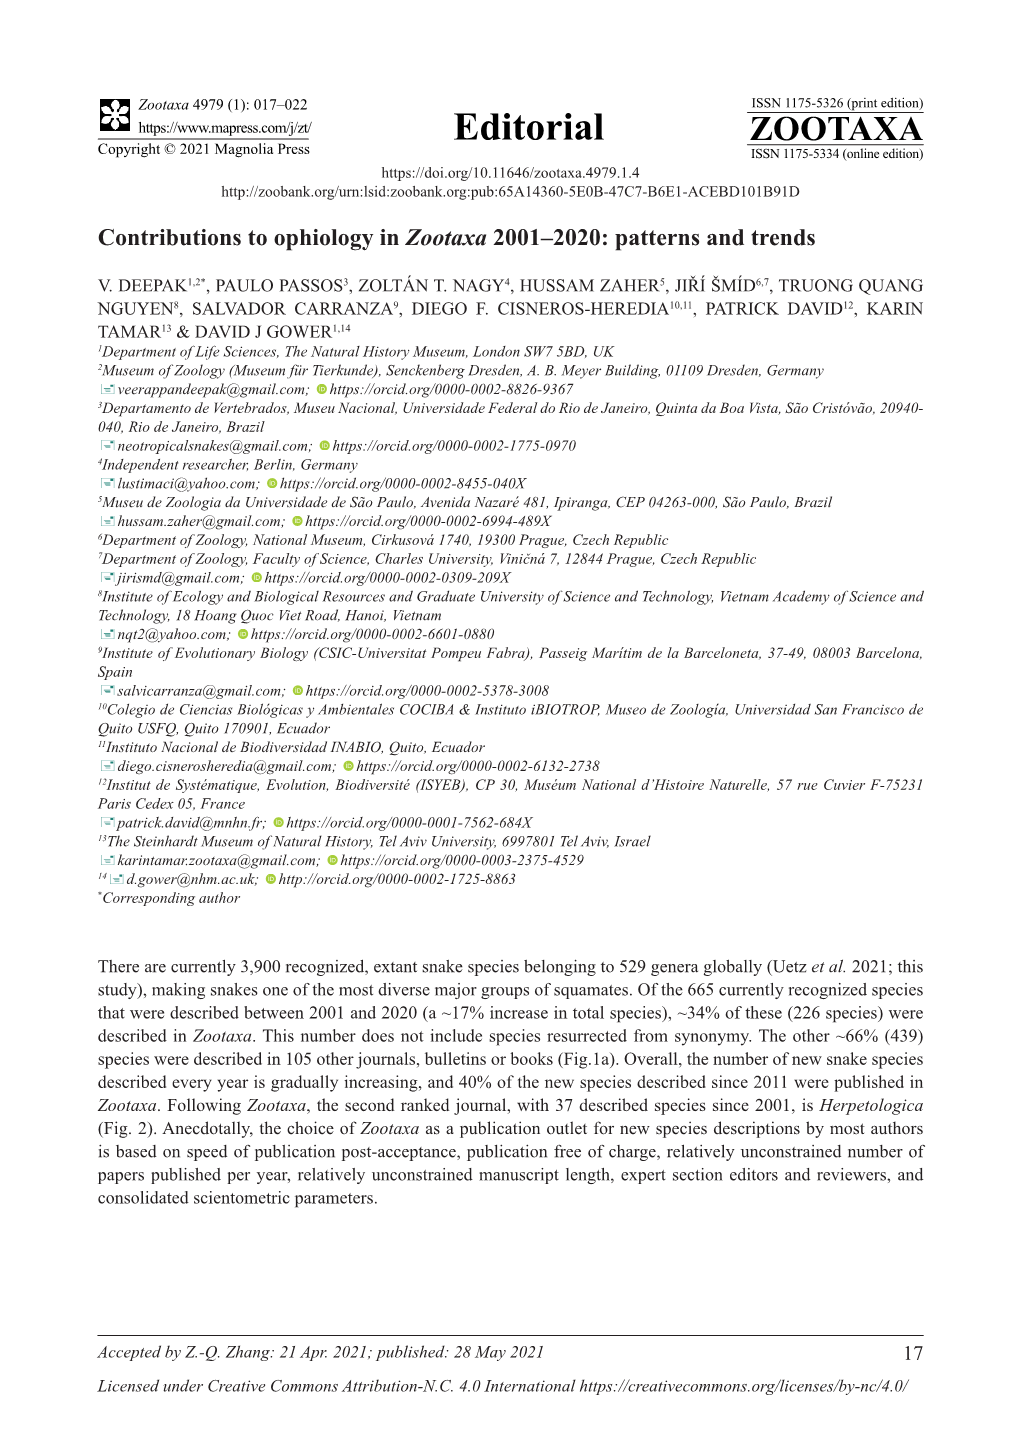 Contributions to Ophiology in Zootaxa 2001–2020: Patterns and Trends